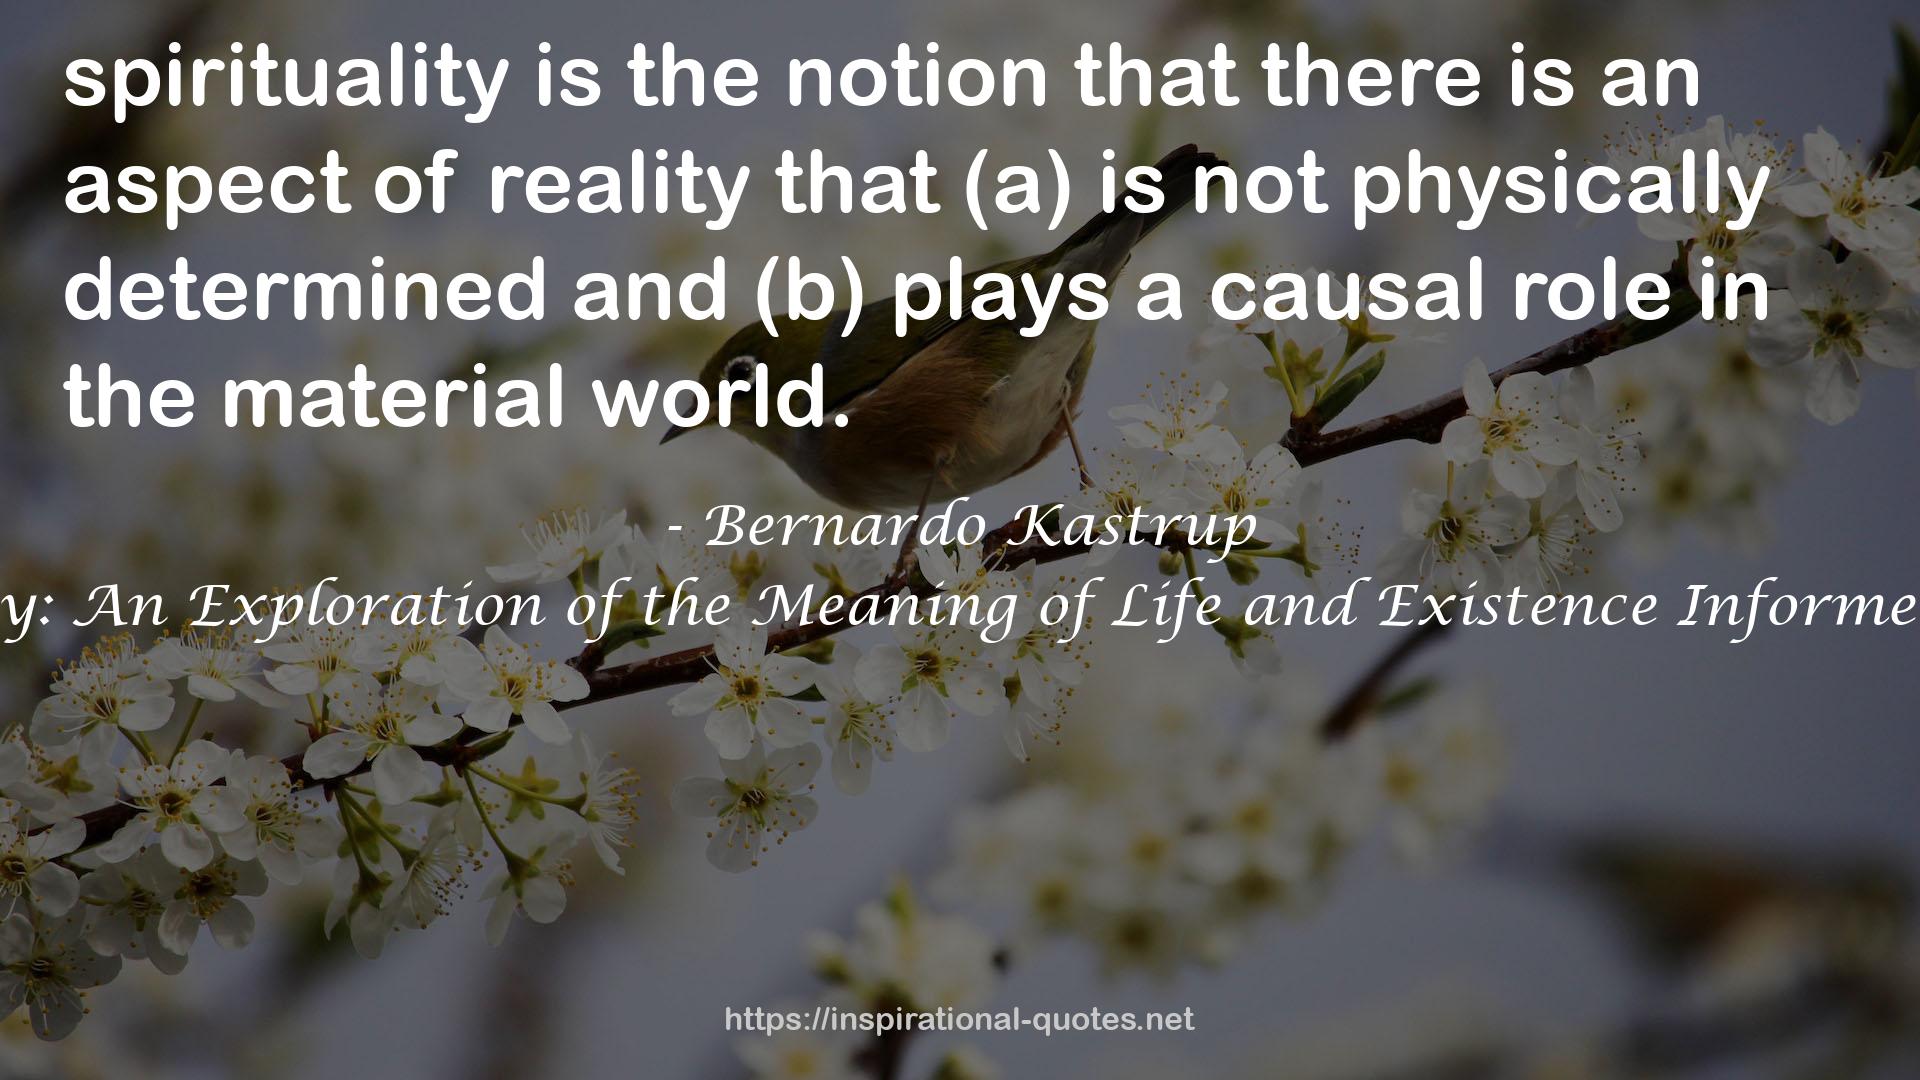 Rationalist Spirituality: An Exploration of the Meaning of Life and Existence Informed by Logic and Science QUOTES